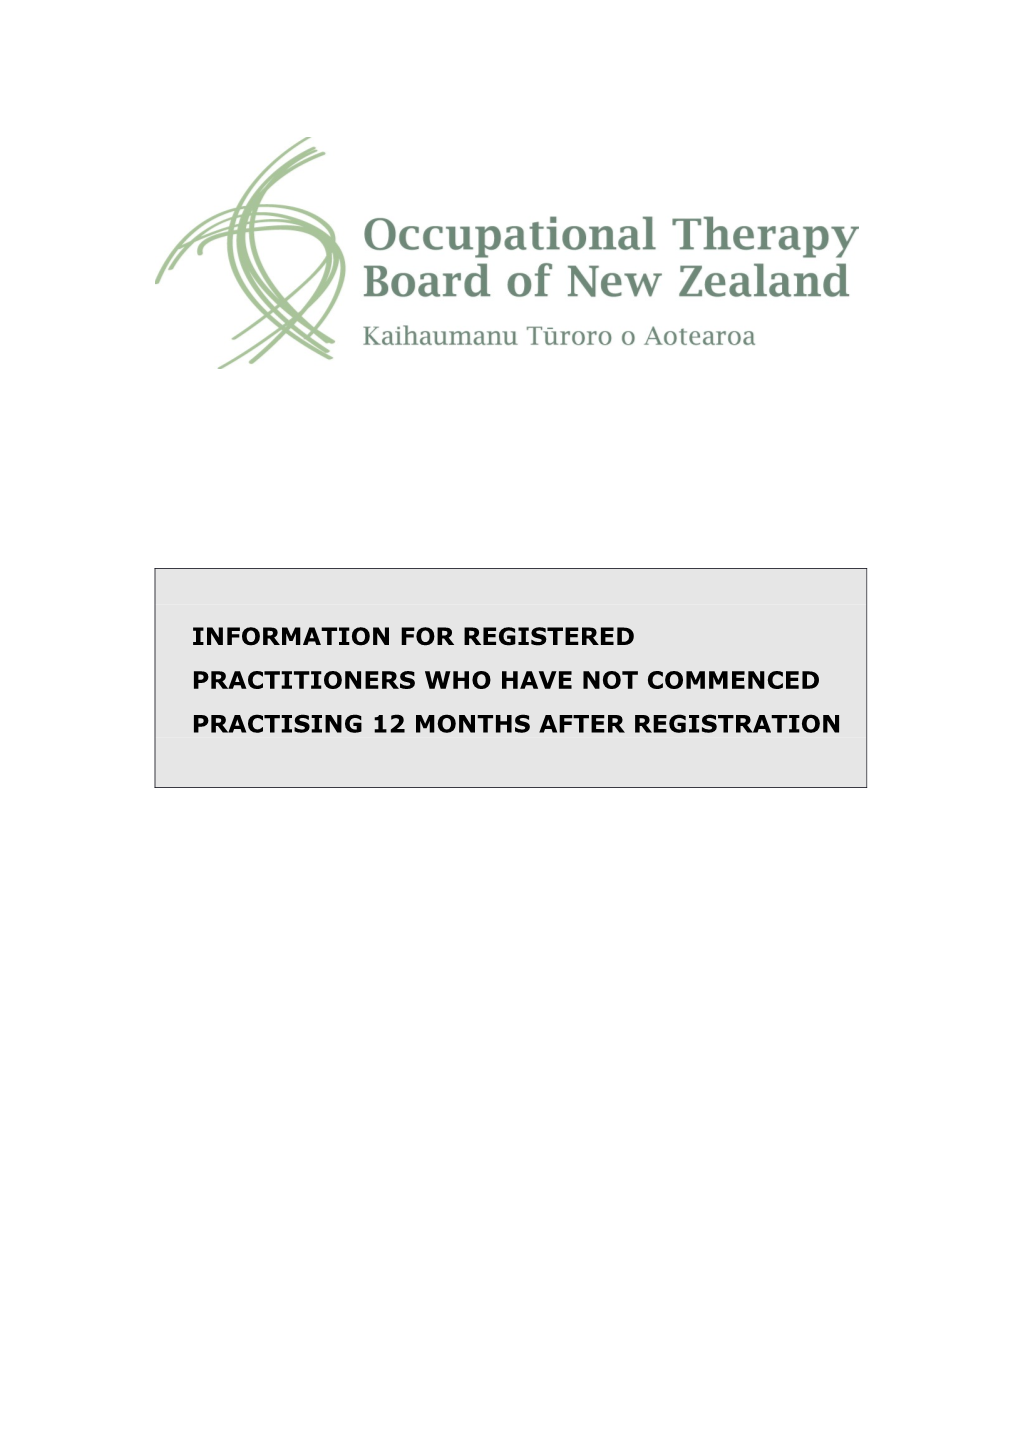 Informationfor Registered Practitioners Who Have Not Commenced Practising 12 Months After